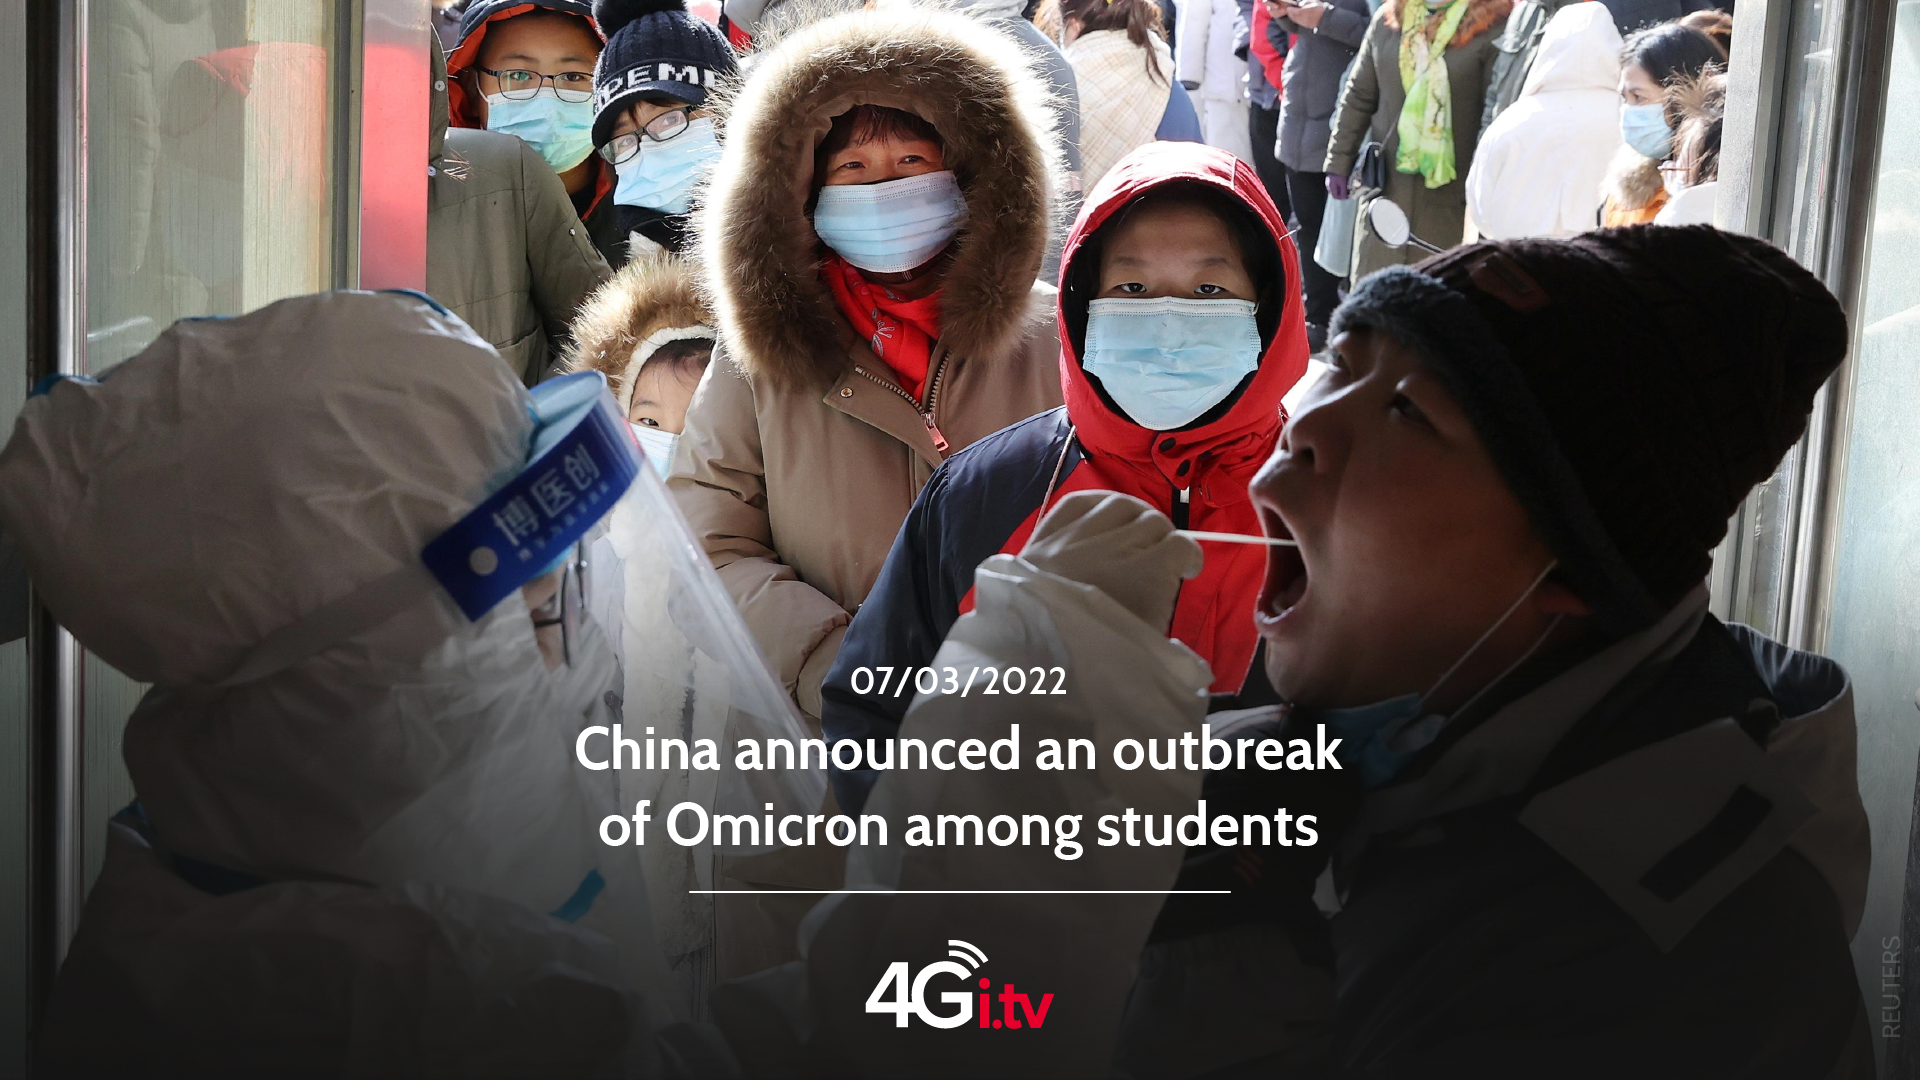 Lesen Sie mehr über den Artikel China announced an outbreak of Omicron among students